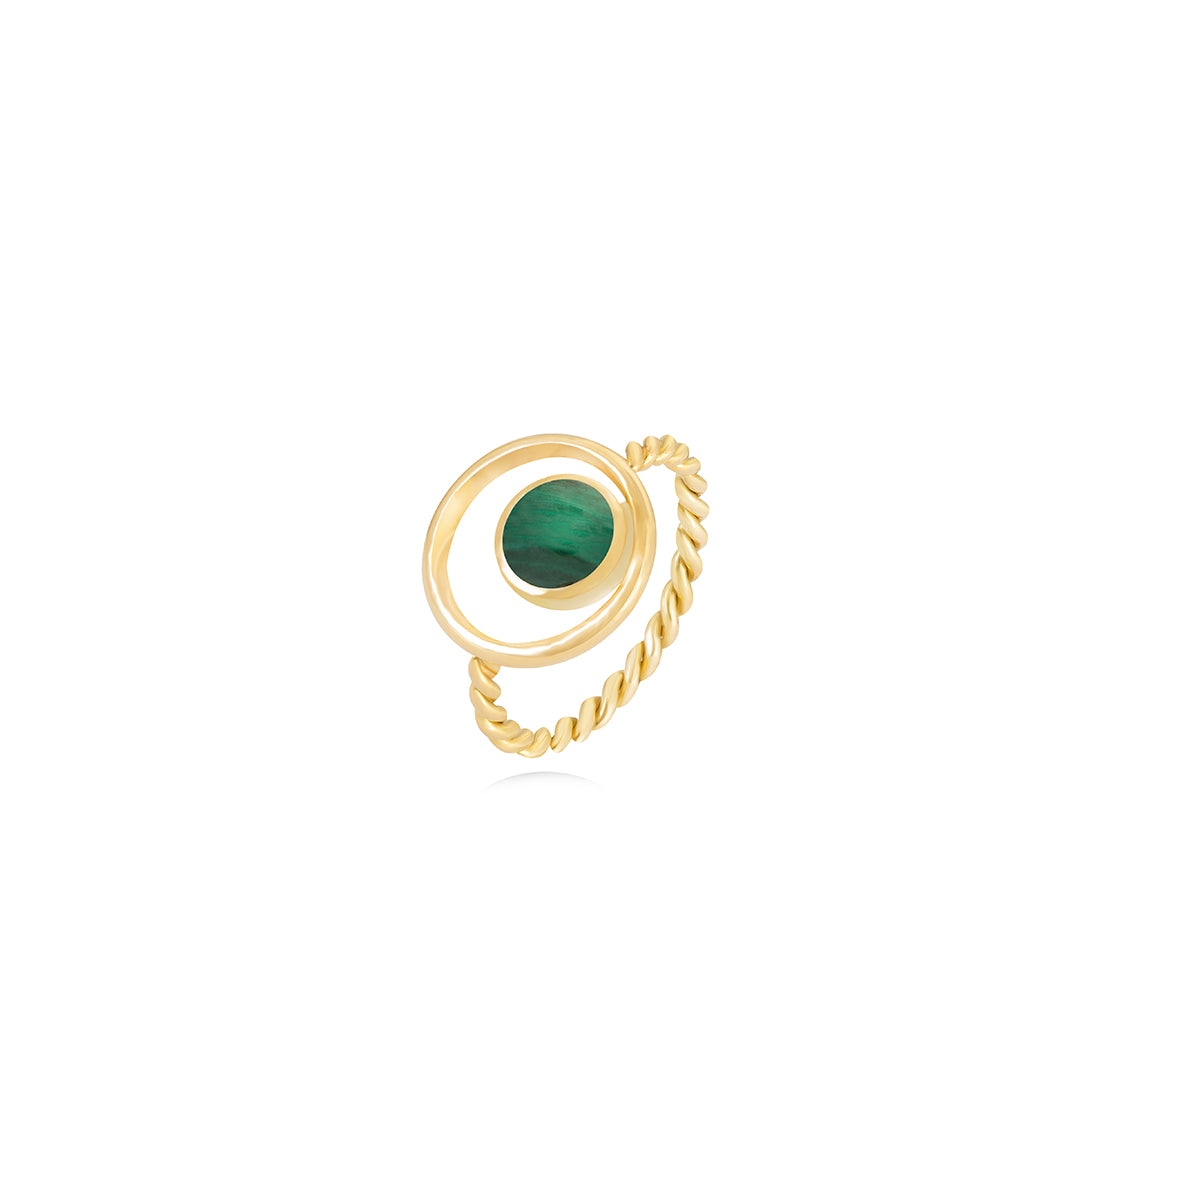 Statement Ring in 18K Yellow Gold